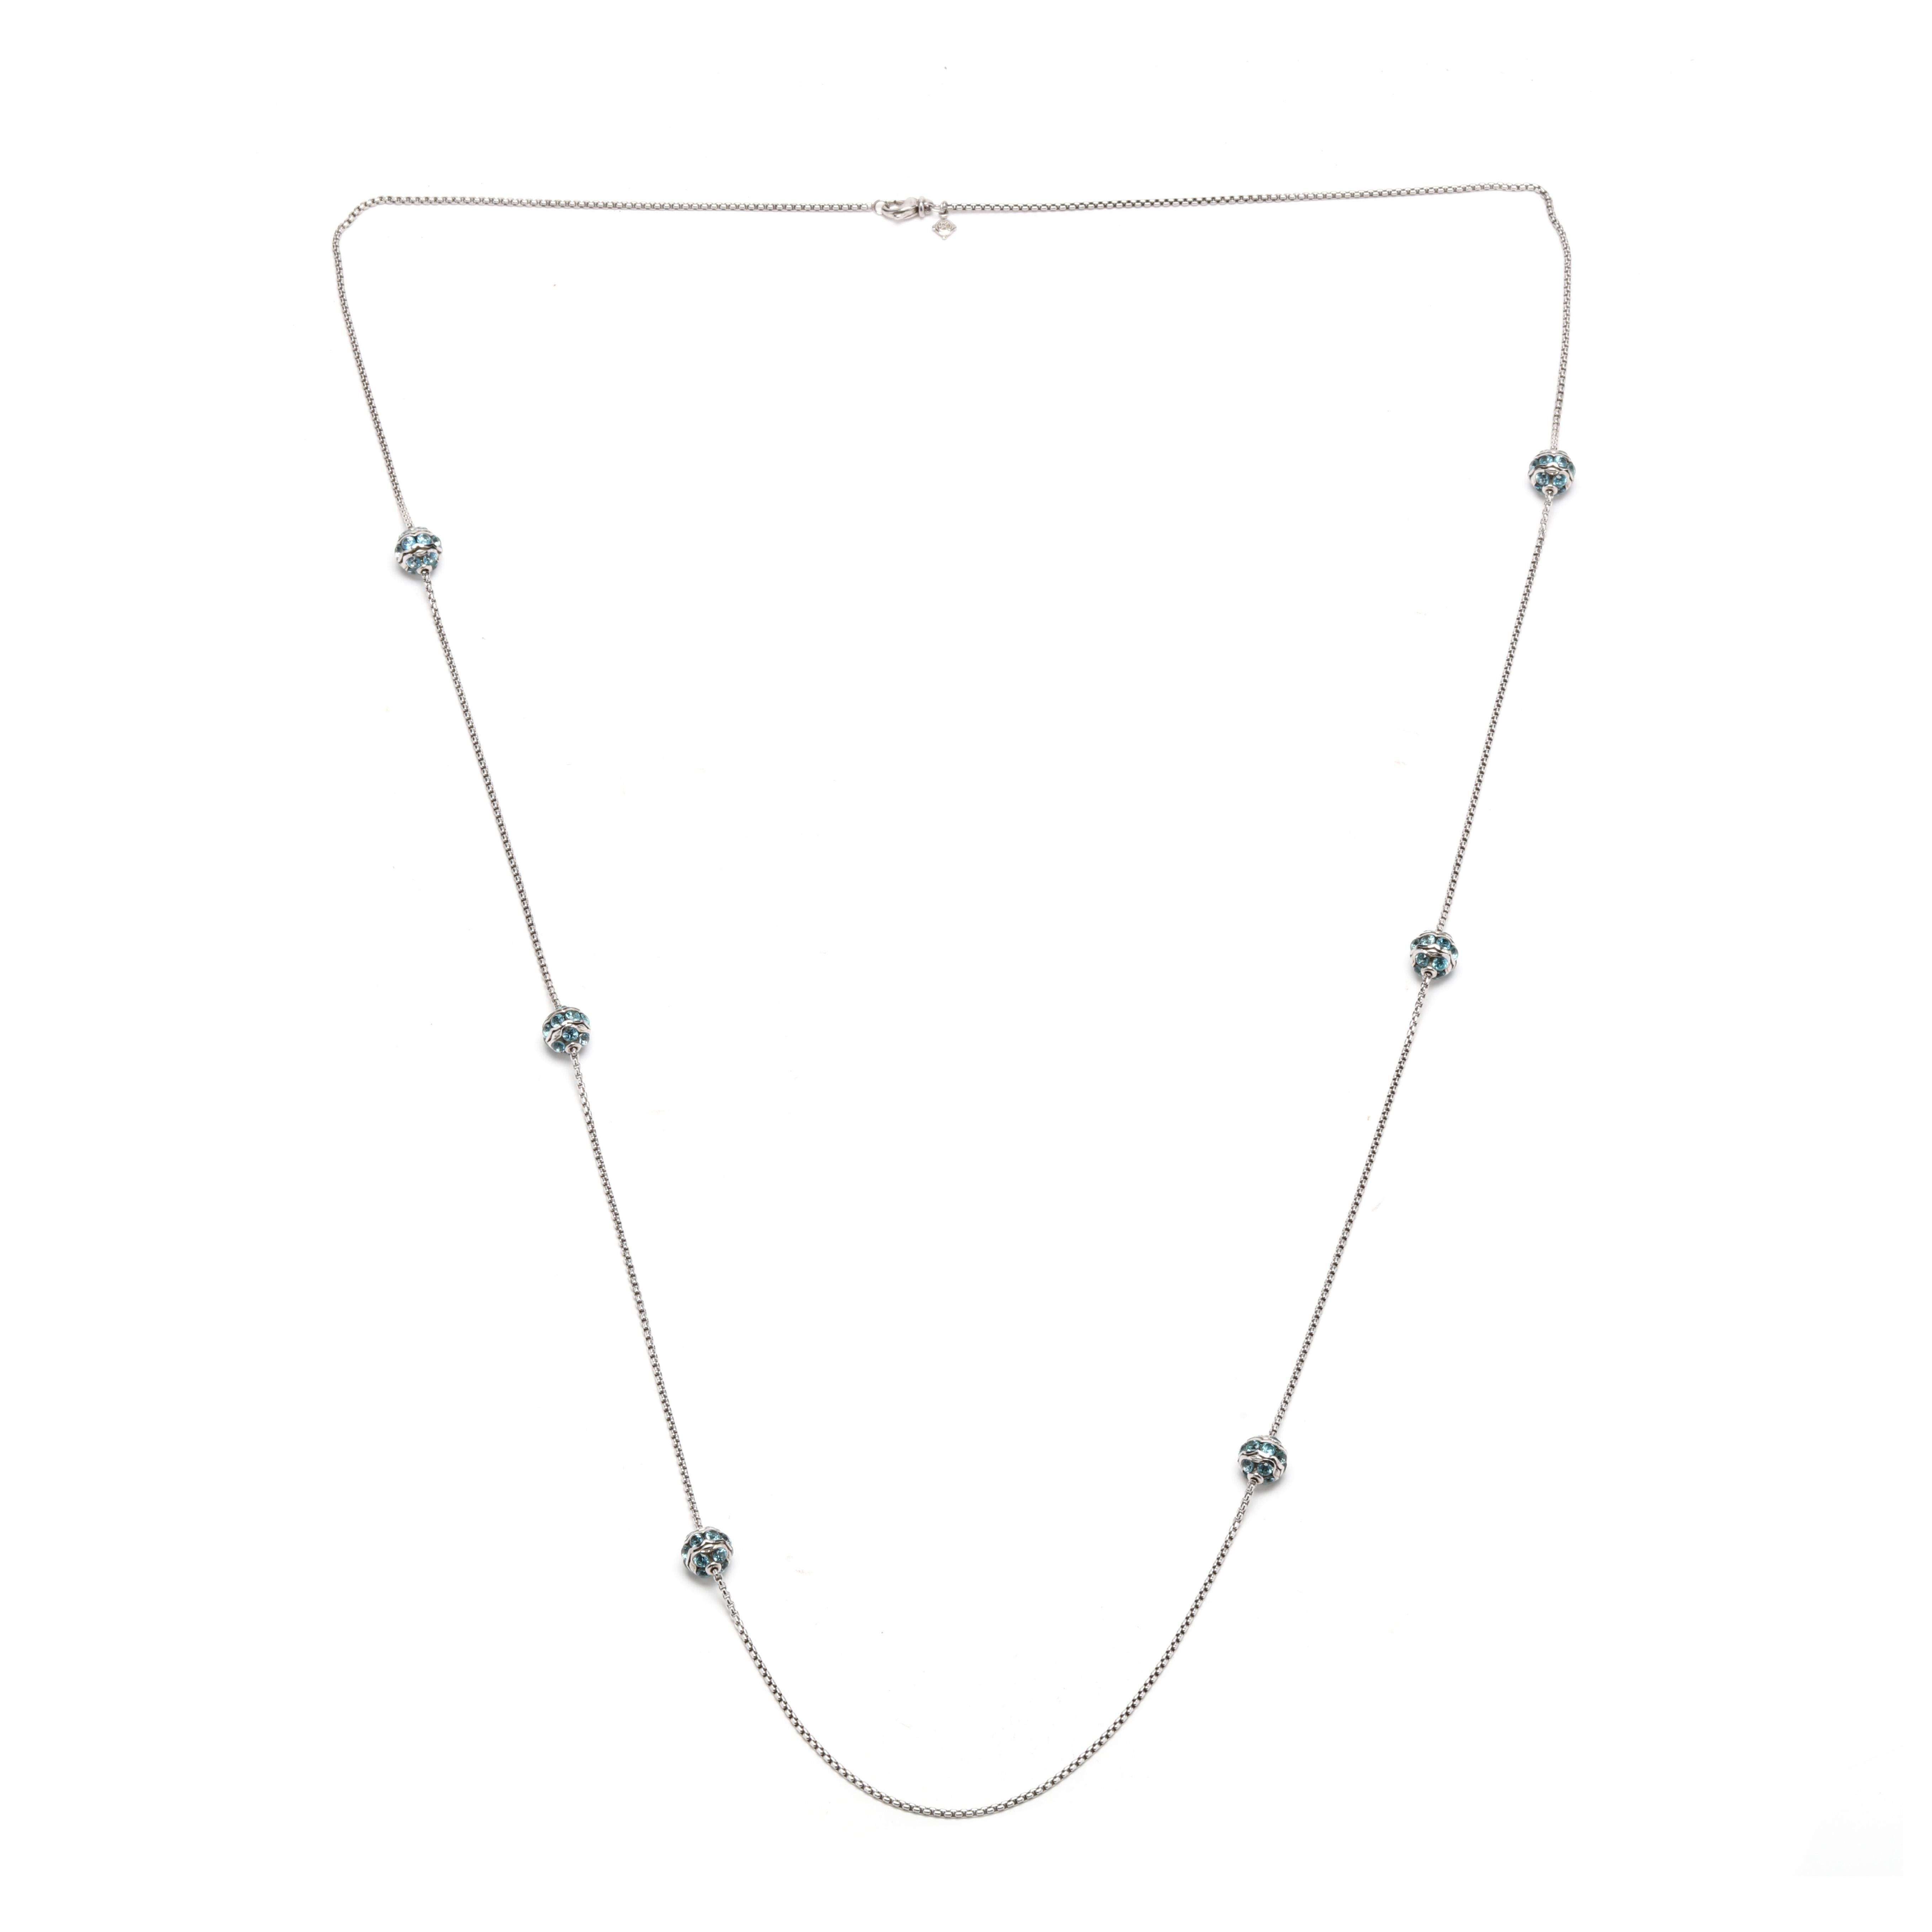 A David Yurman sterling silver and 18 karat yellow gold blue topaz station necklace. This long silver necklace features a thin box chain with six round beads set with round brilliant cut blue topaz stones and with a lobster clasp.

Stones:
- blue